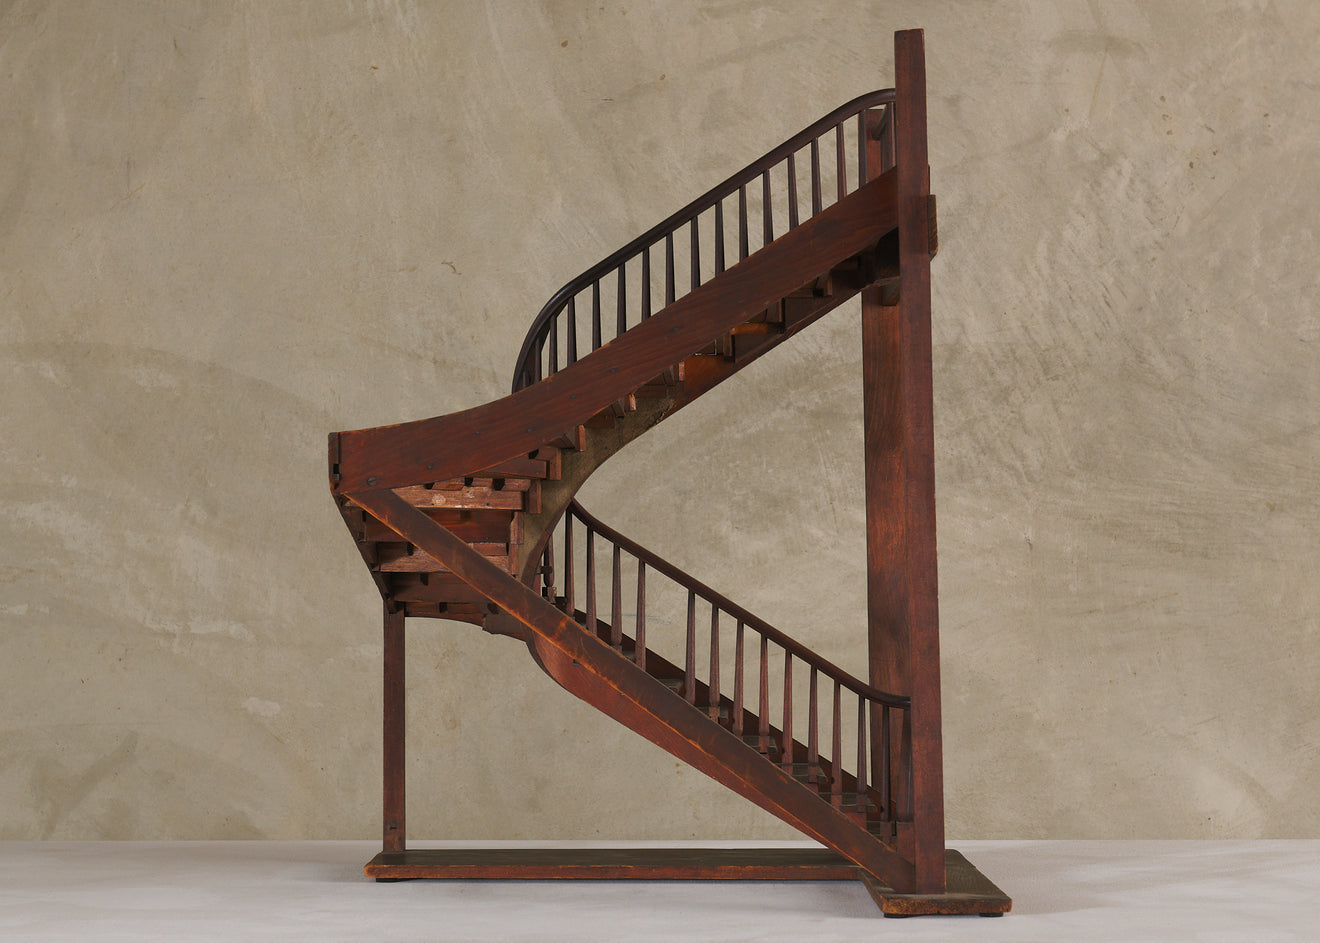 UNUSUALLY LARGE STAIRCASE MAQUETTE